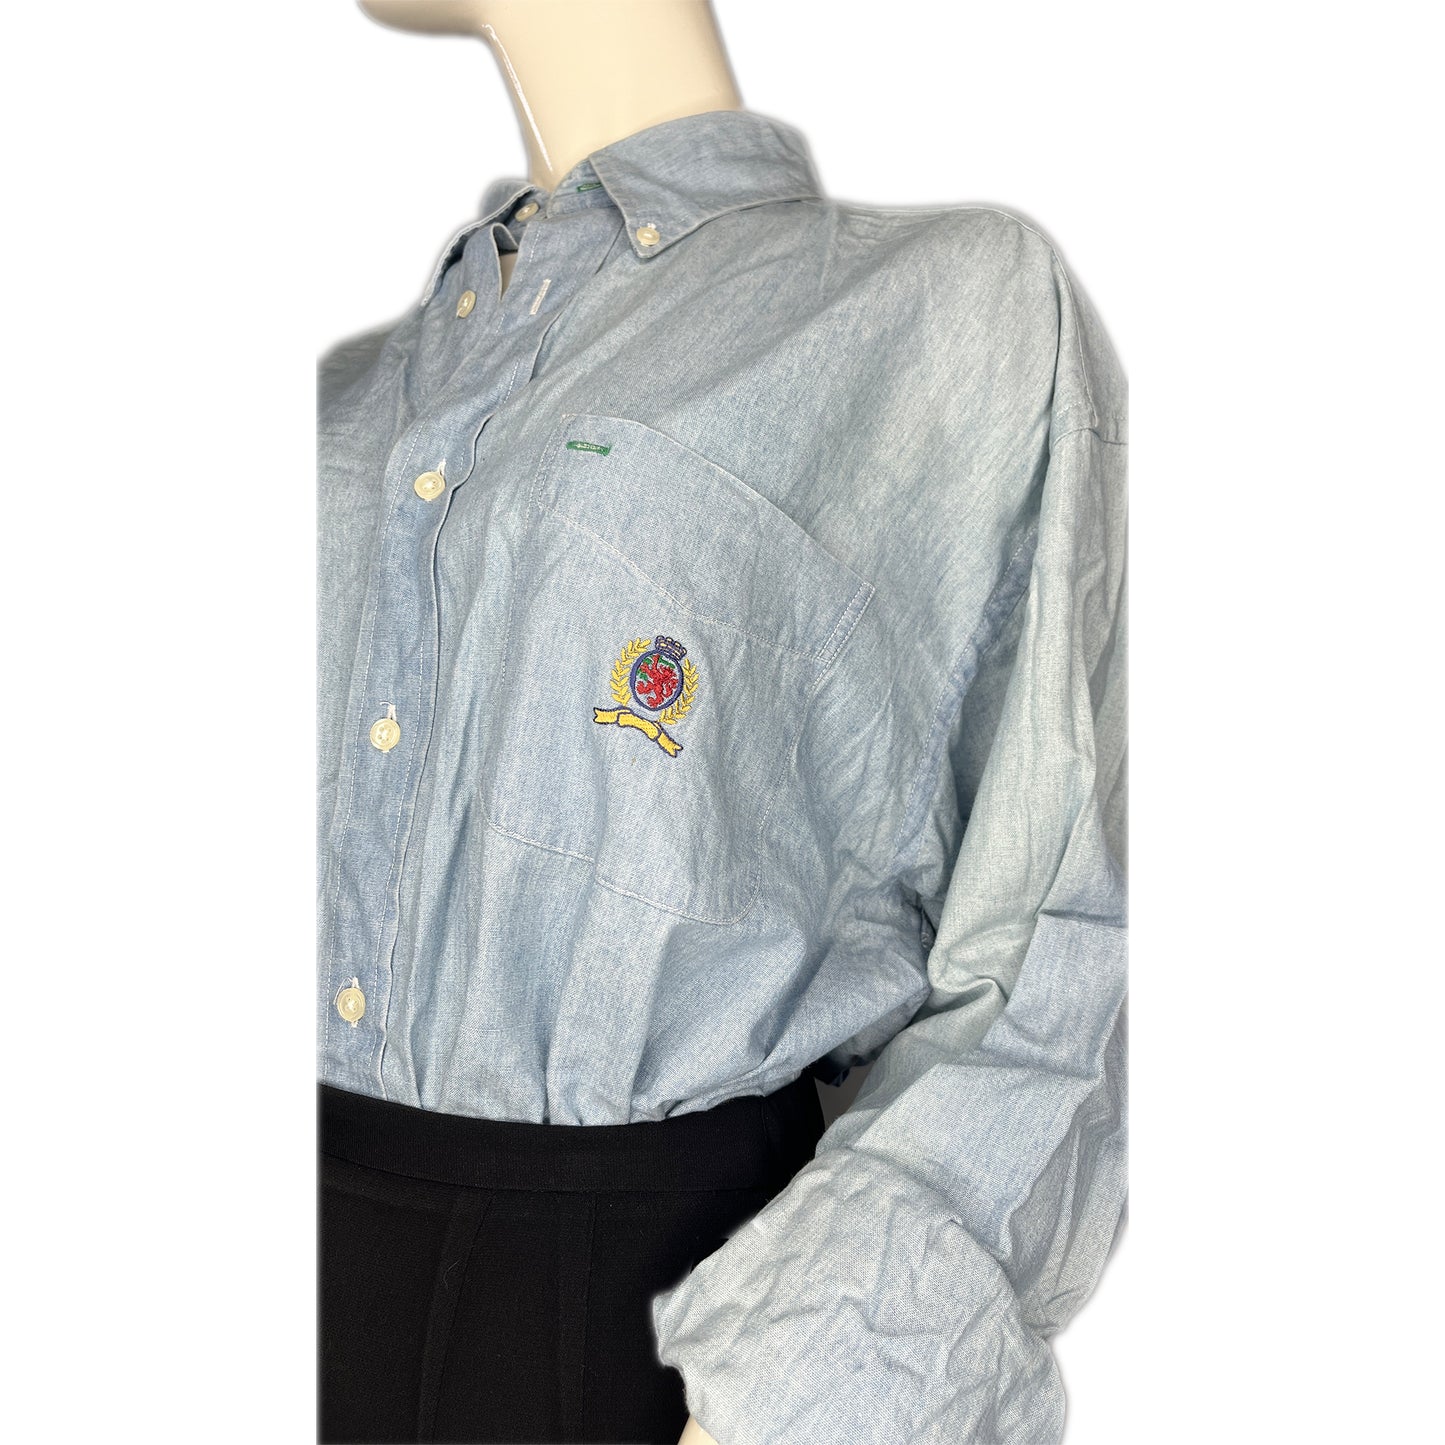 Tommy Hilfiger Top Collared Button Down Long Sleeves Light Denim Blue Size L SKU 000256-11